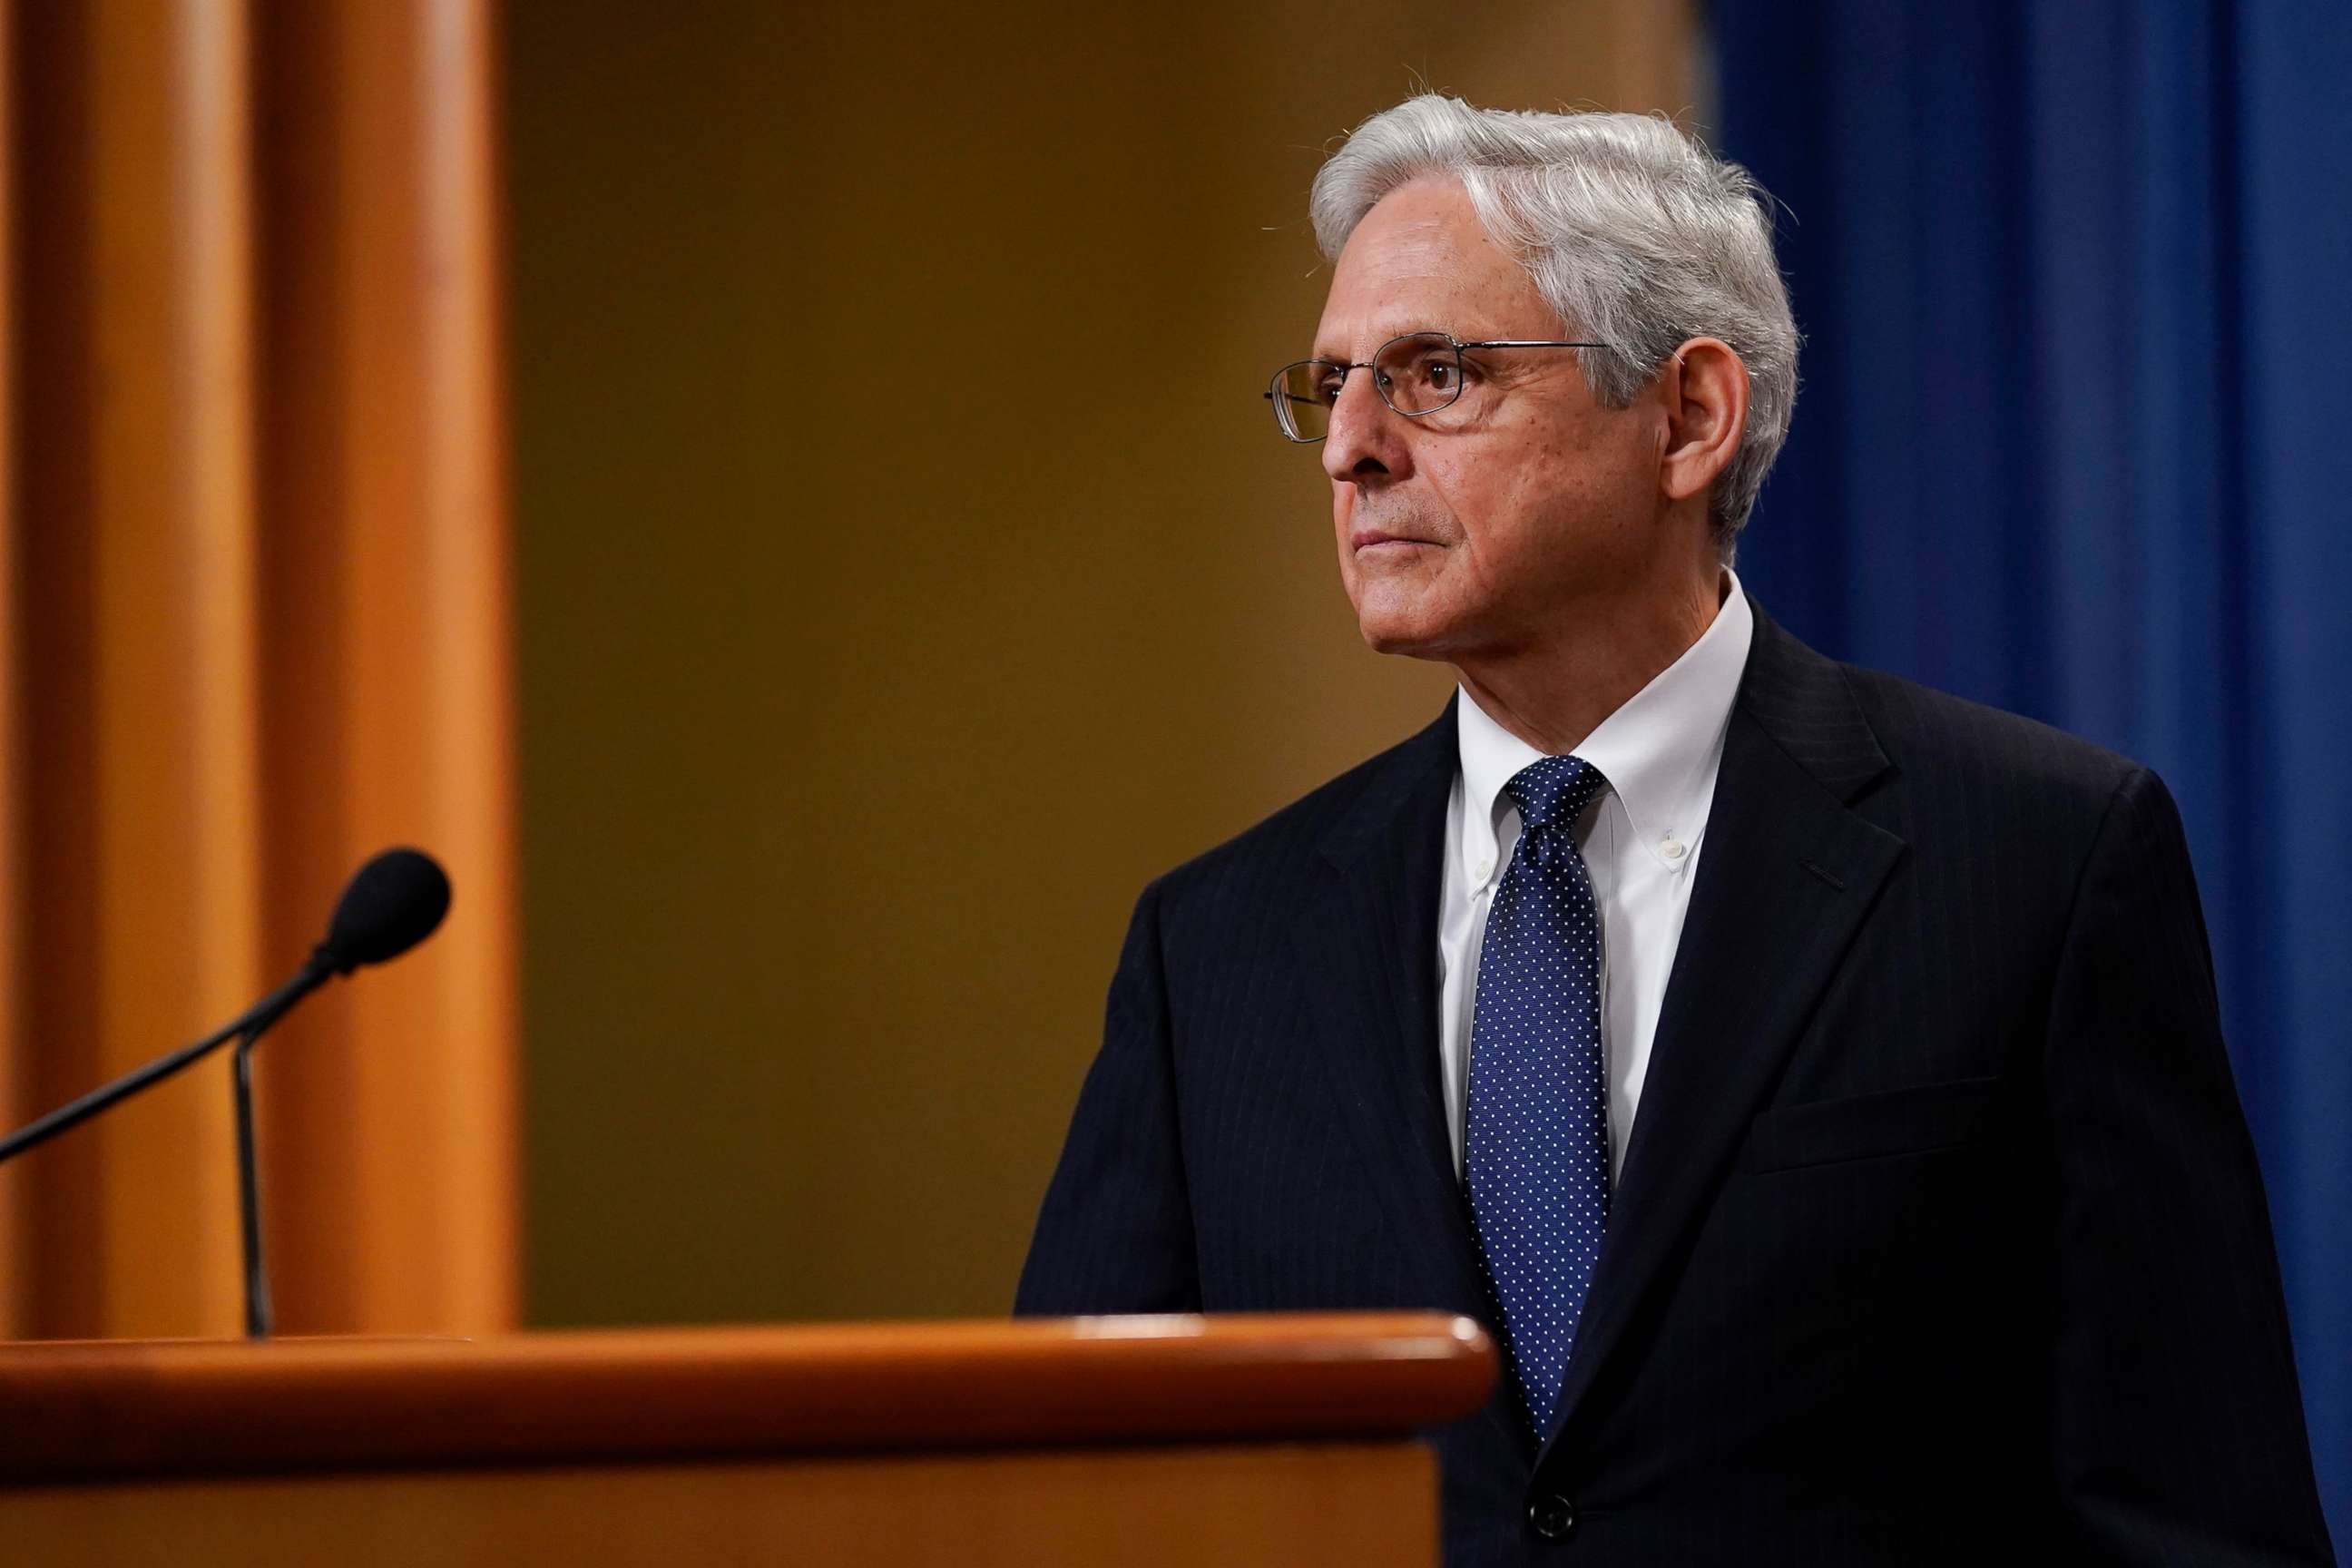 PHOTO: Attorney General Merrick Garland listens to a question as he leaves the podium after speaking at the Justice Department in Washington, Aug. 11, 2022.